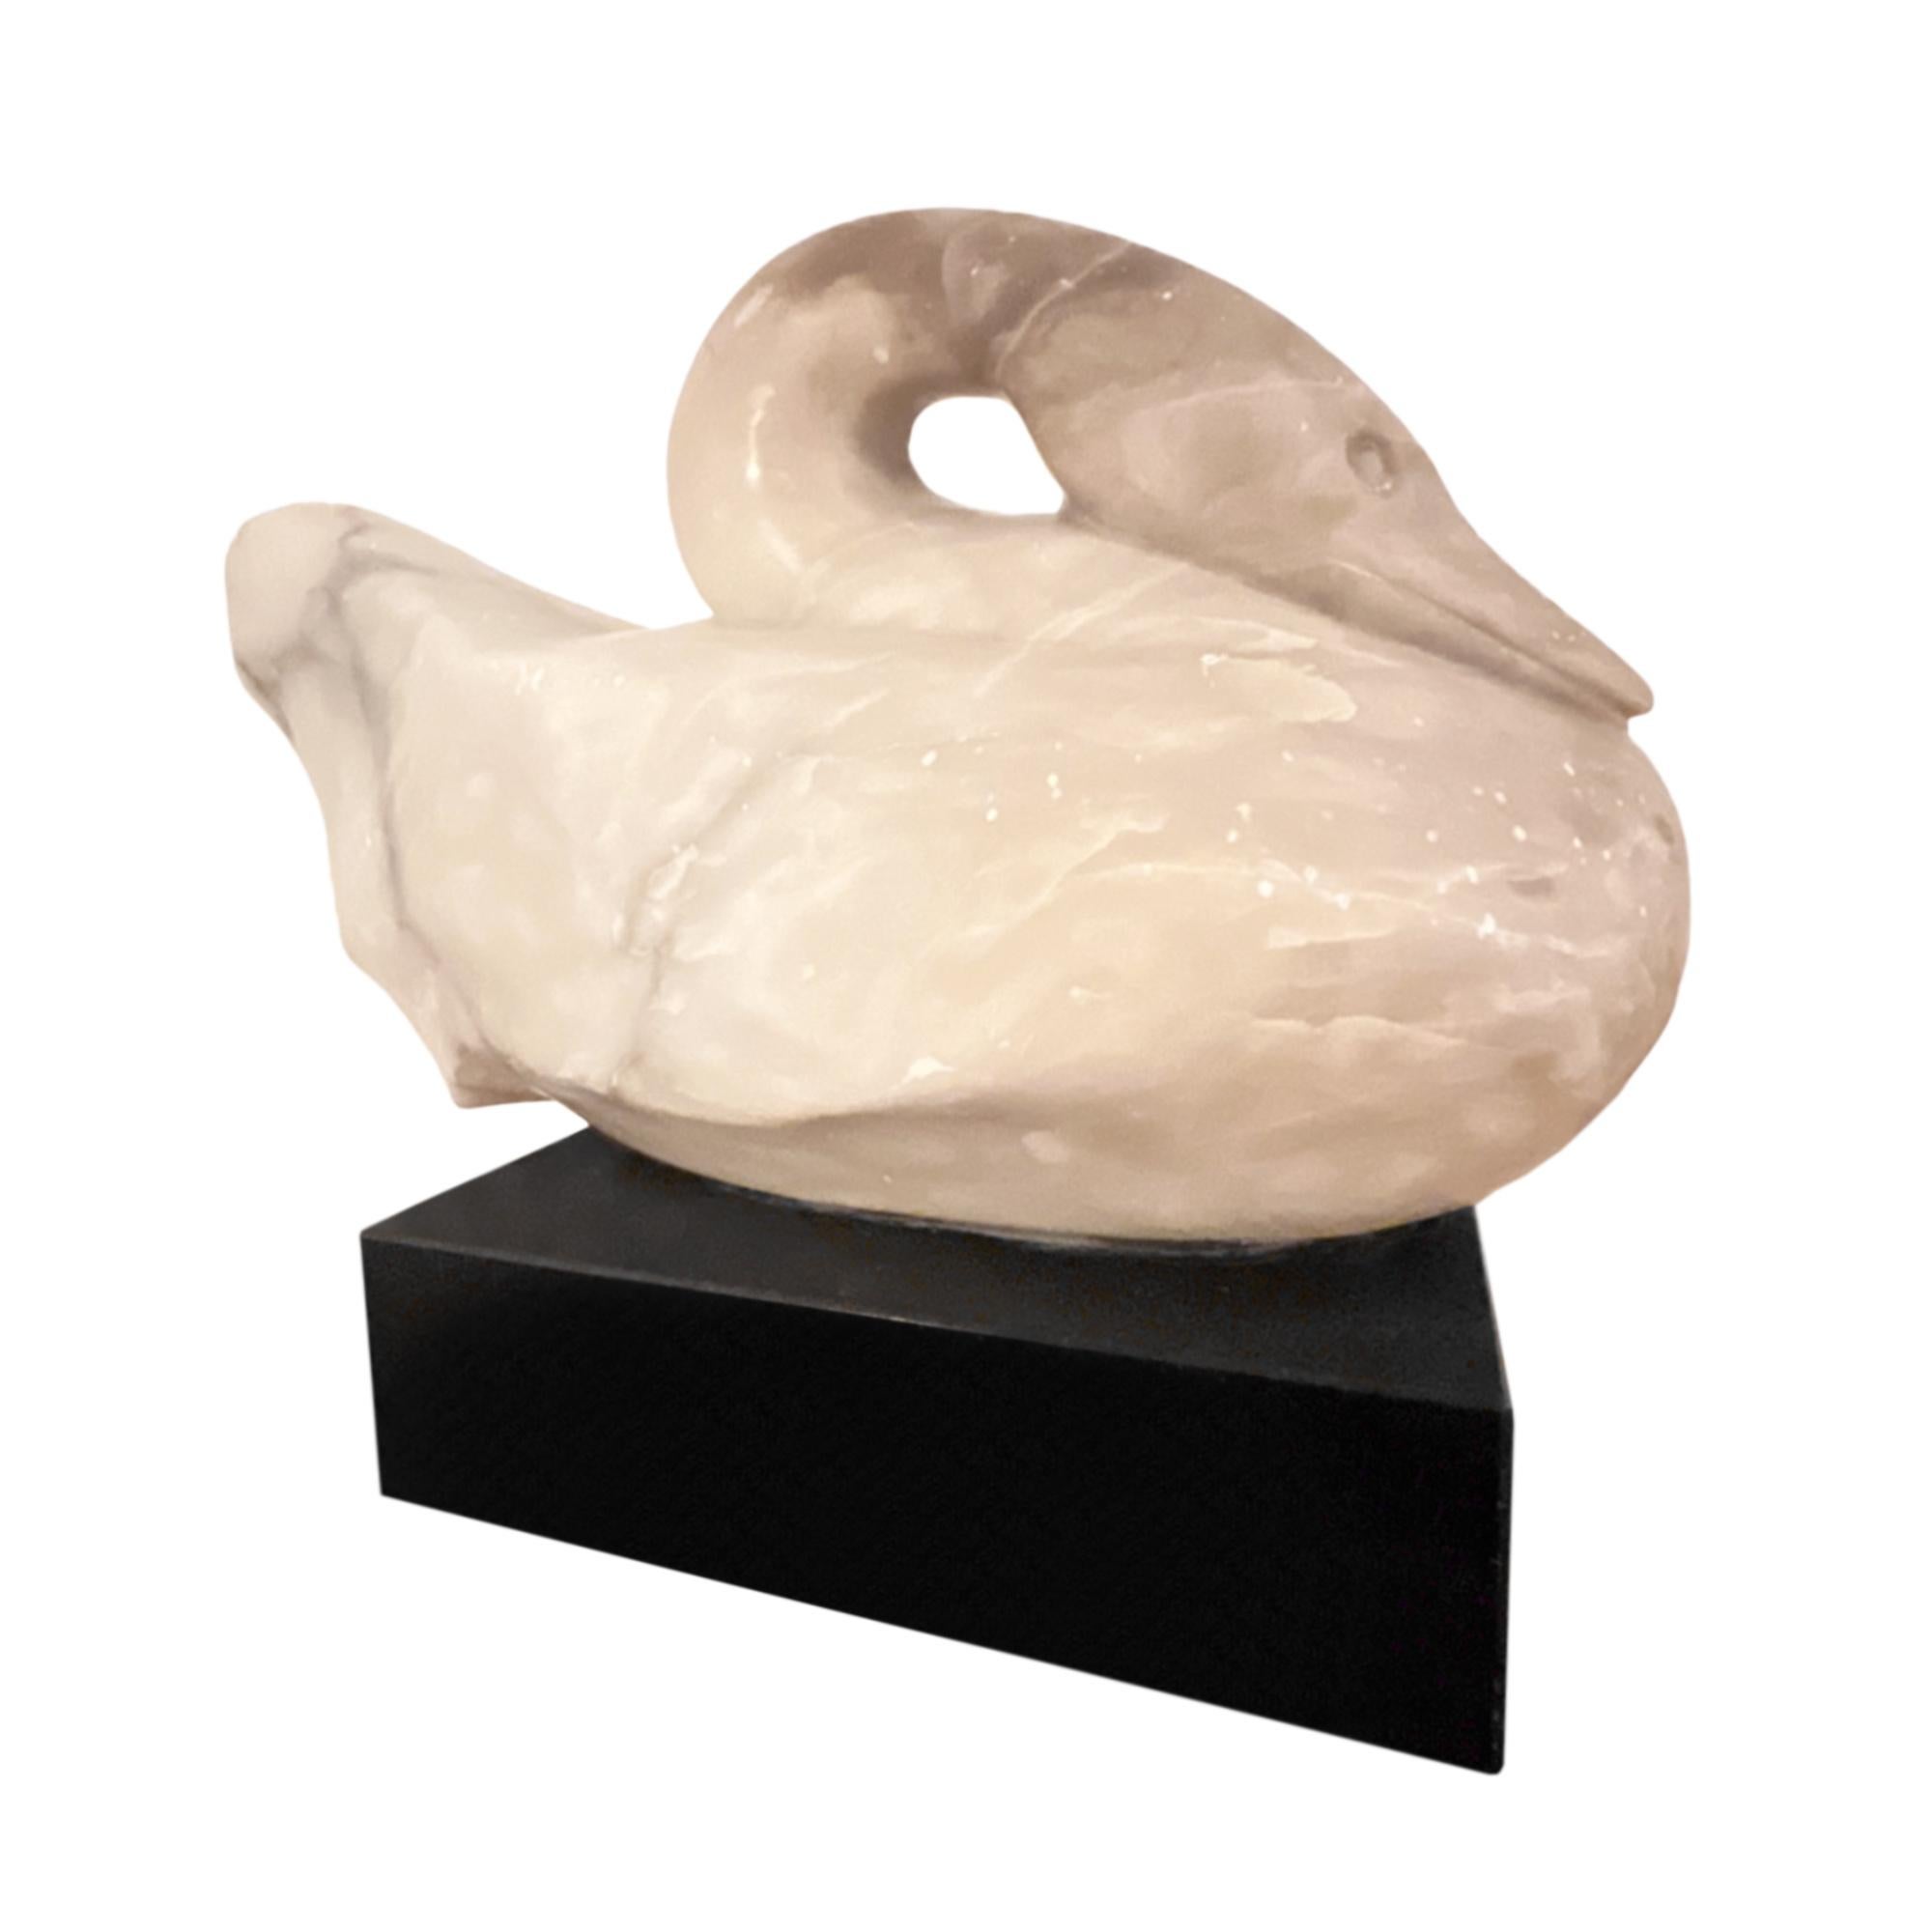 Carved Onyx Swan Sculpture on a Rotating Plinth, By Ralph Hurst For Sale